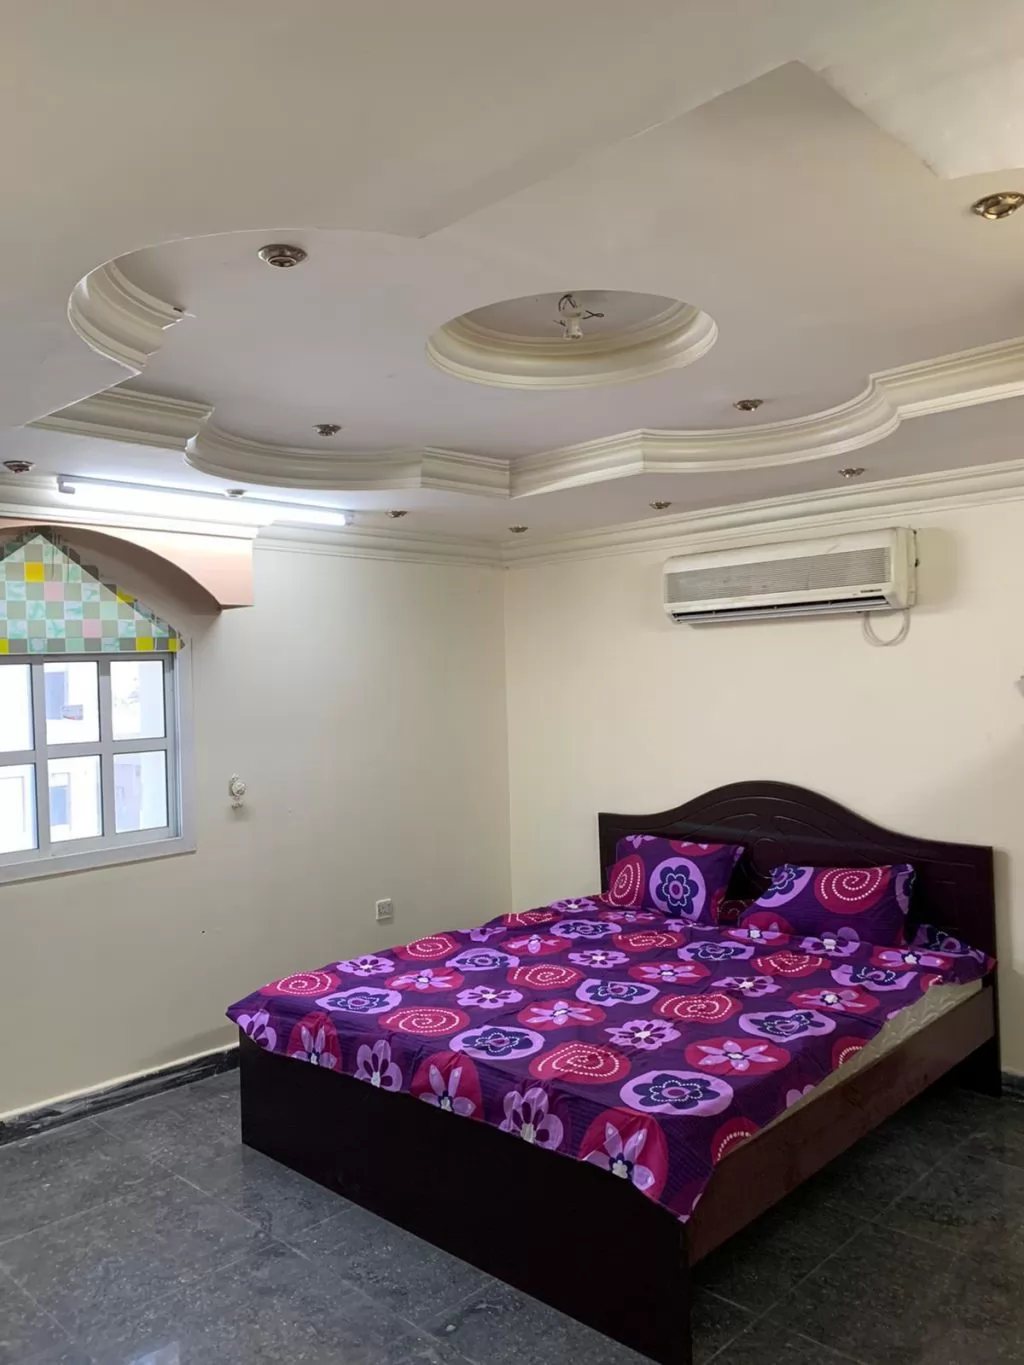 Residential Property Studio F/F Apartment  for rent in Al Wakrah #13999 - 1  image 